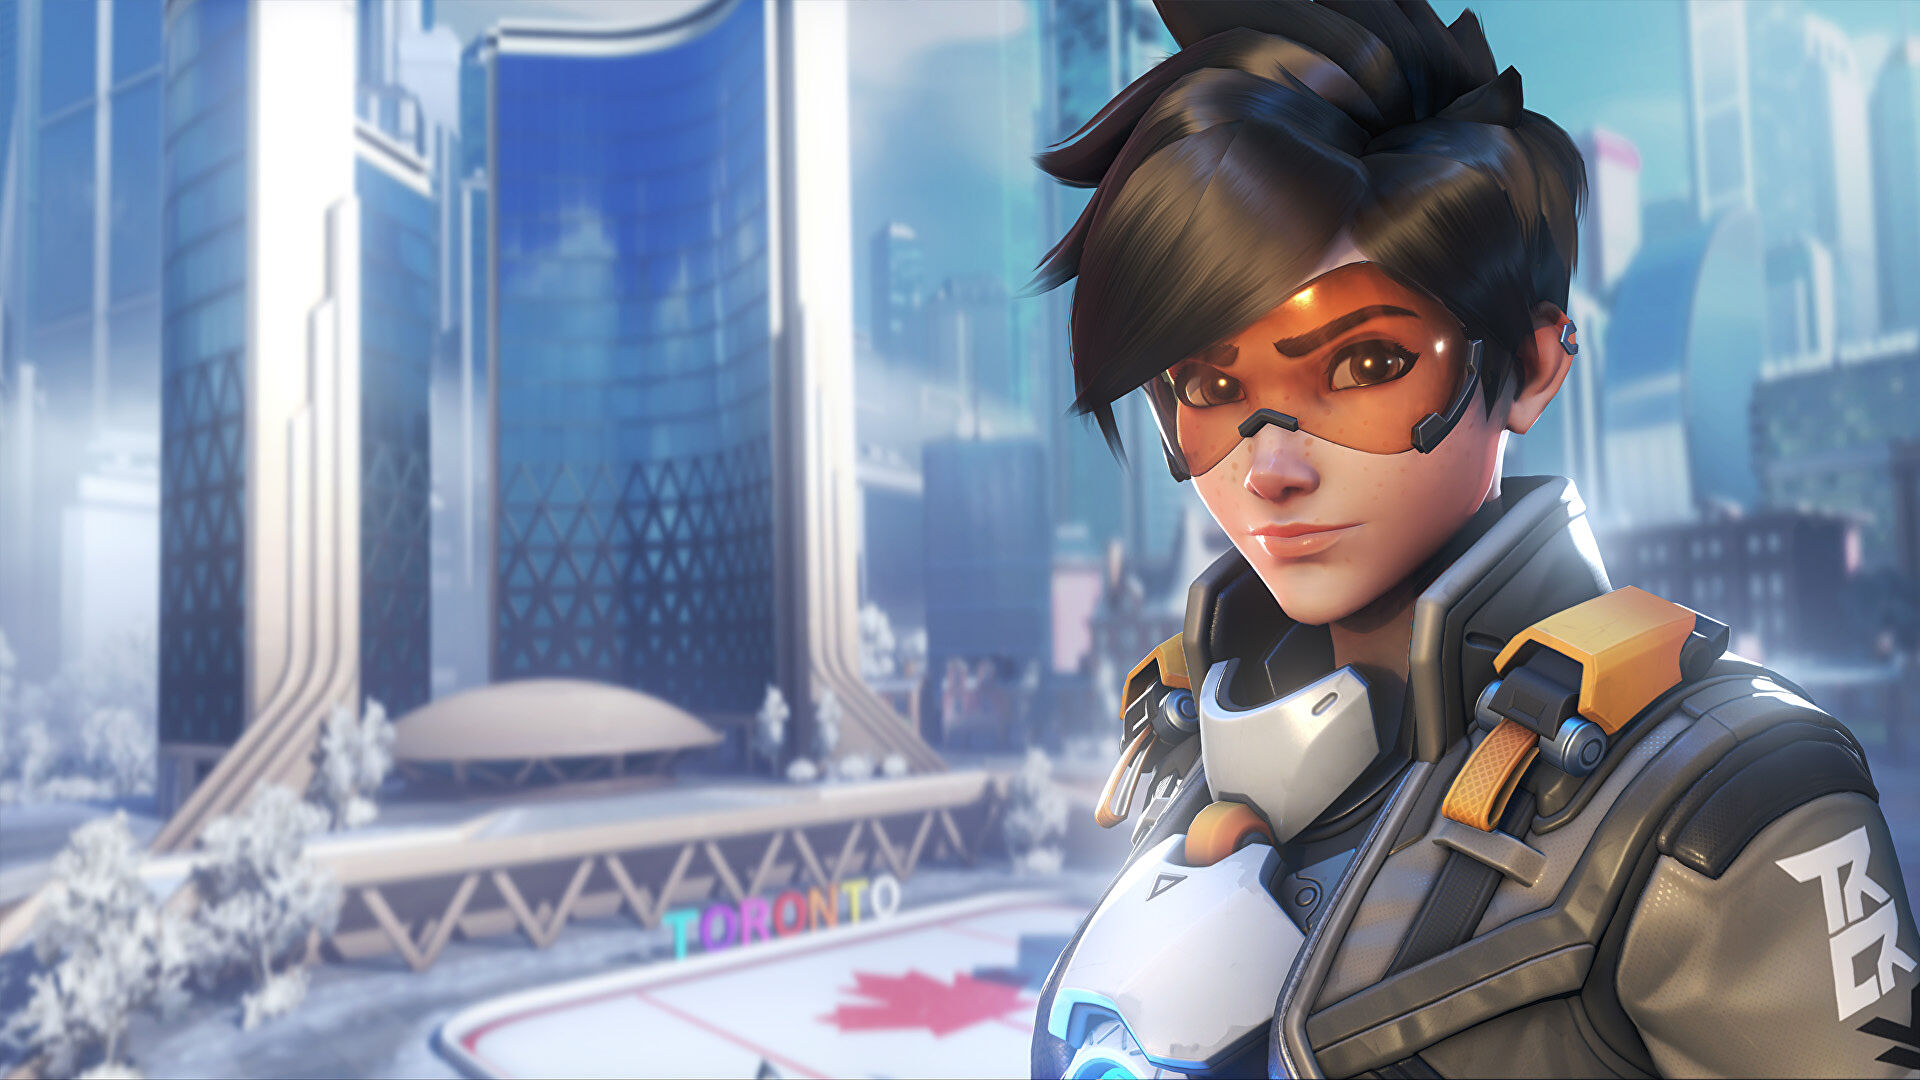 Blizzard isn’t planning to disable Tracer over an Overwatch 2 bug that gives her a major buff